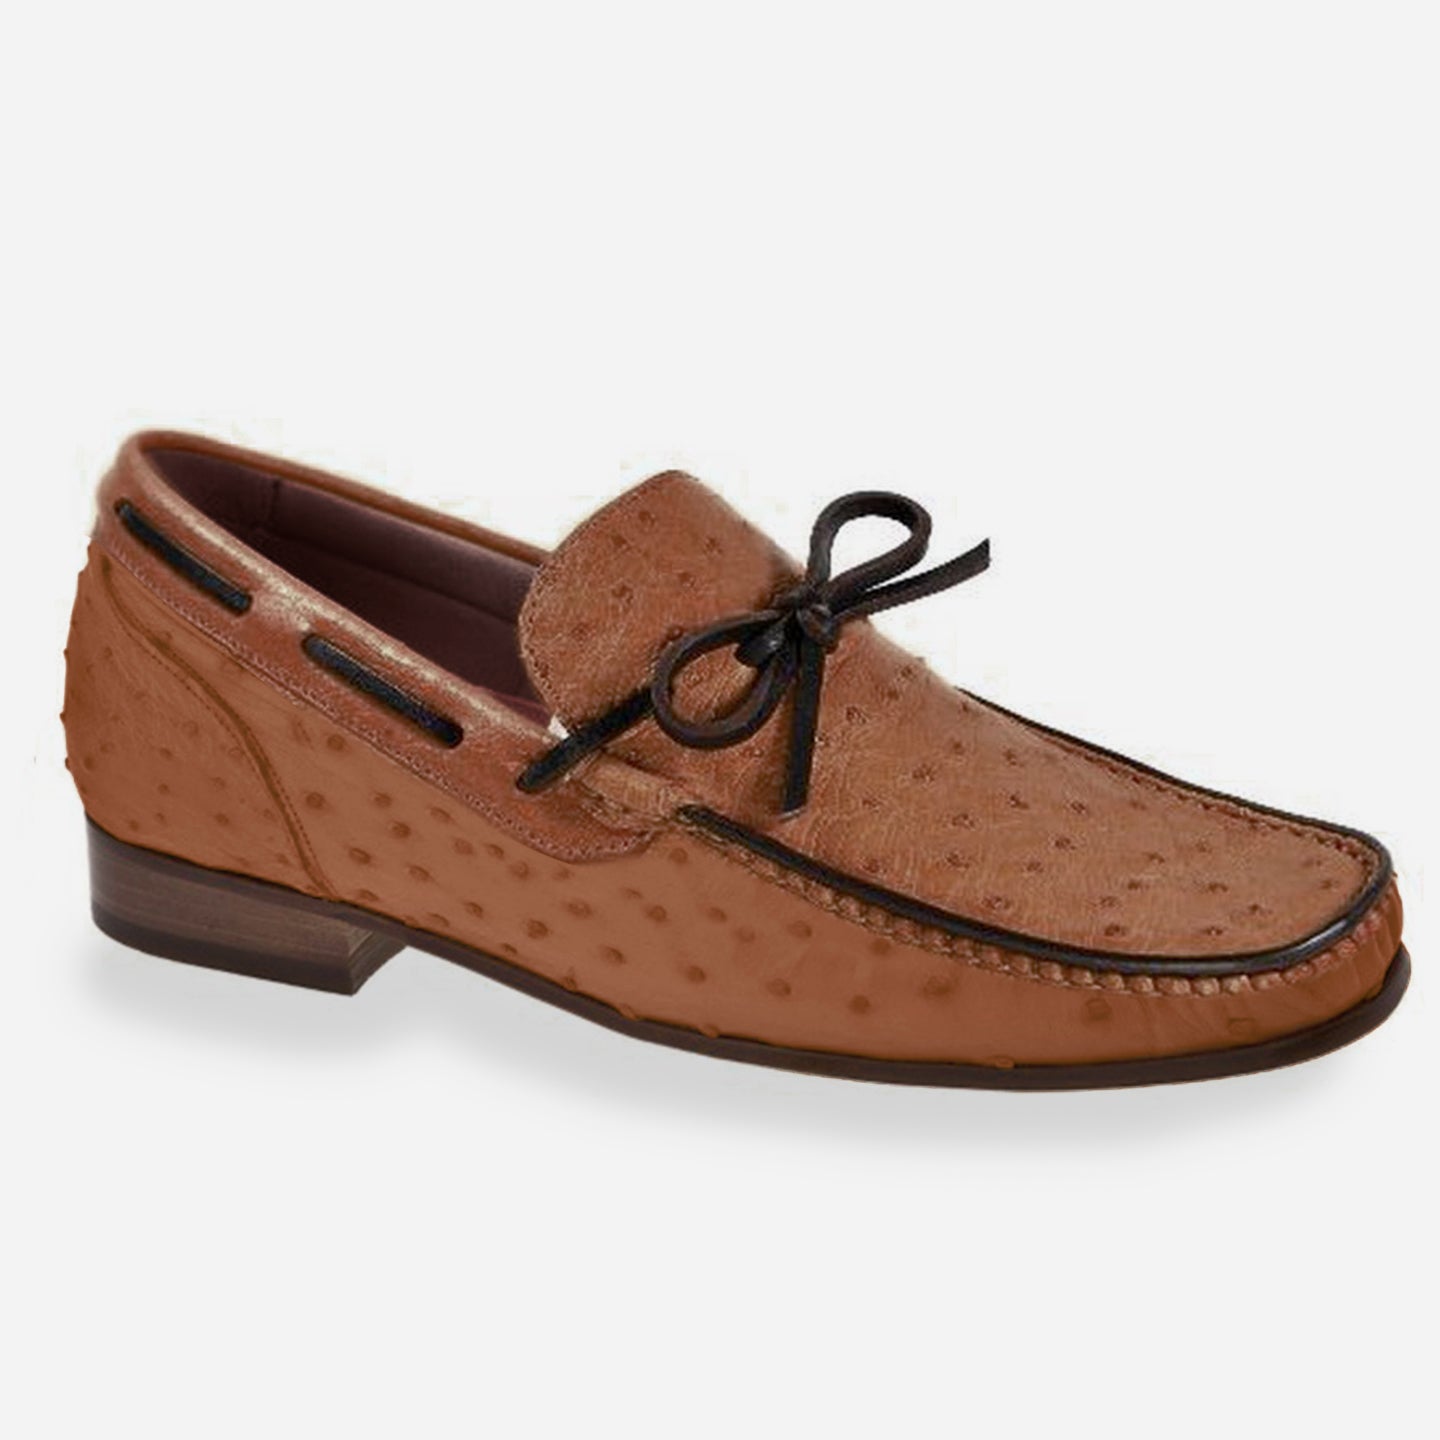 Johny Weber Handmade Brown Ostrich Leather Loafers